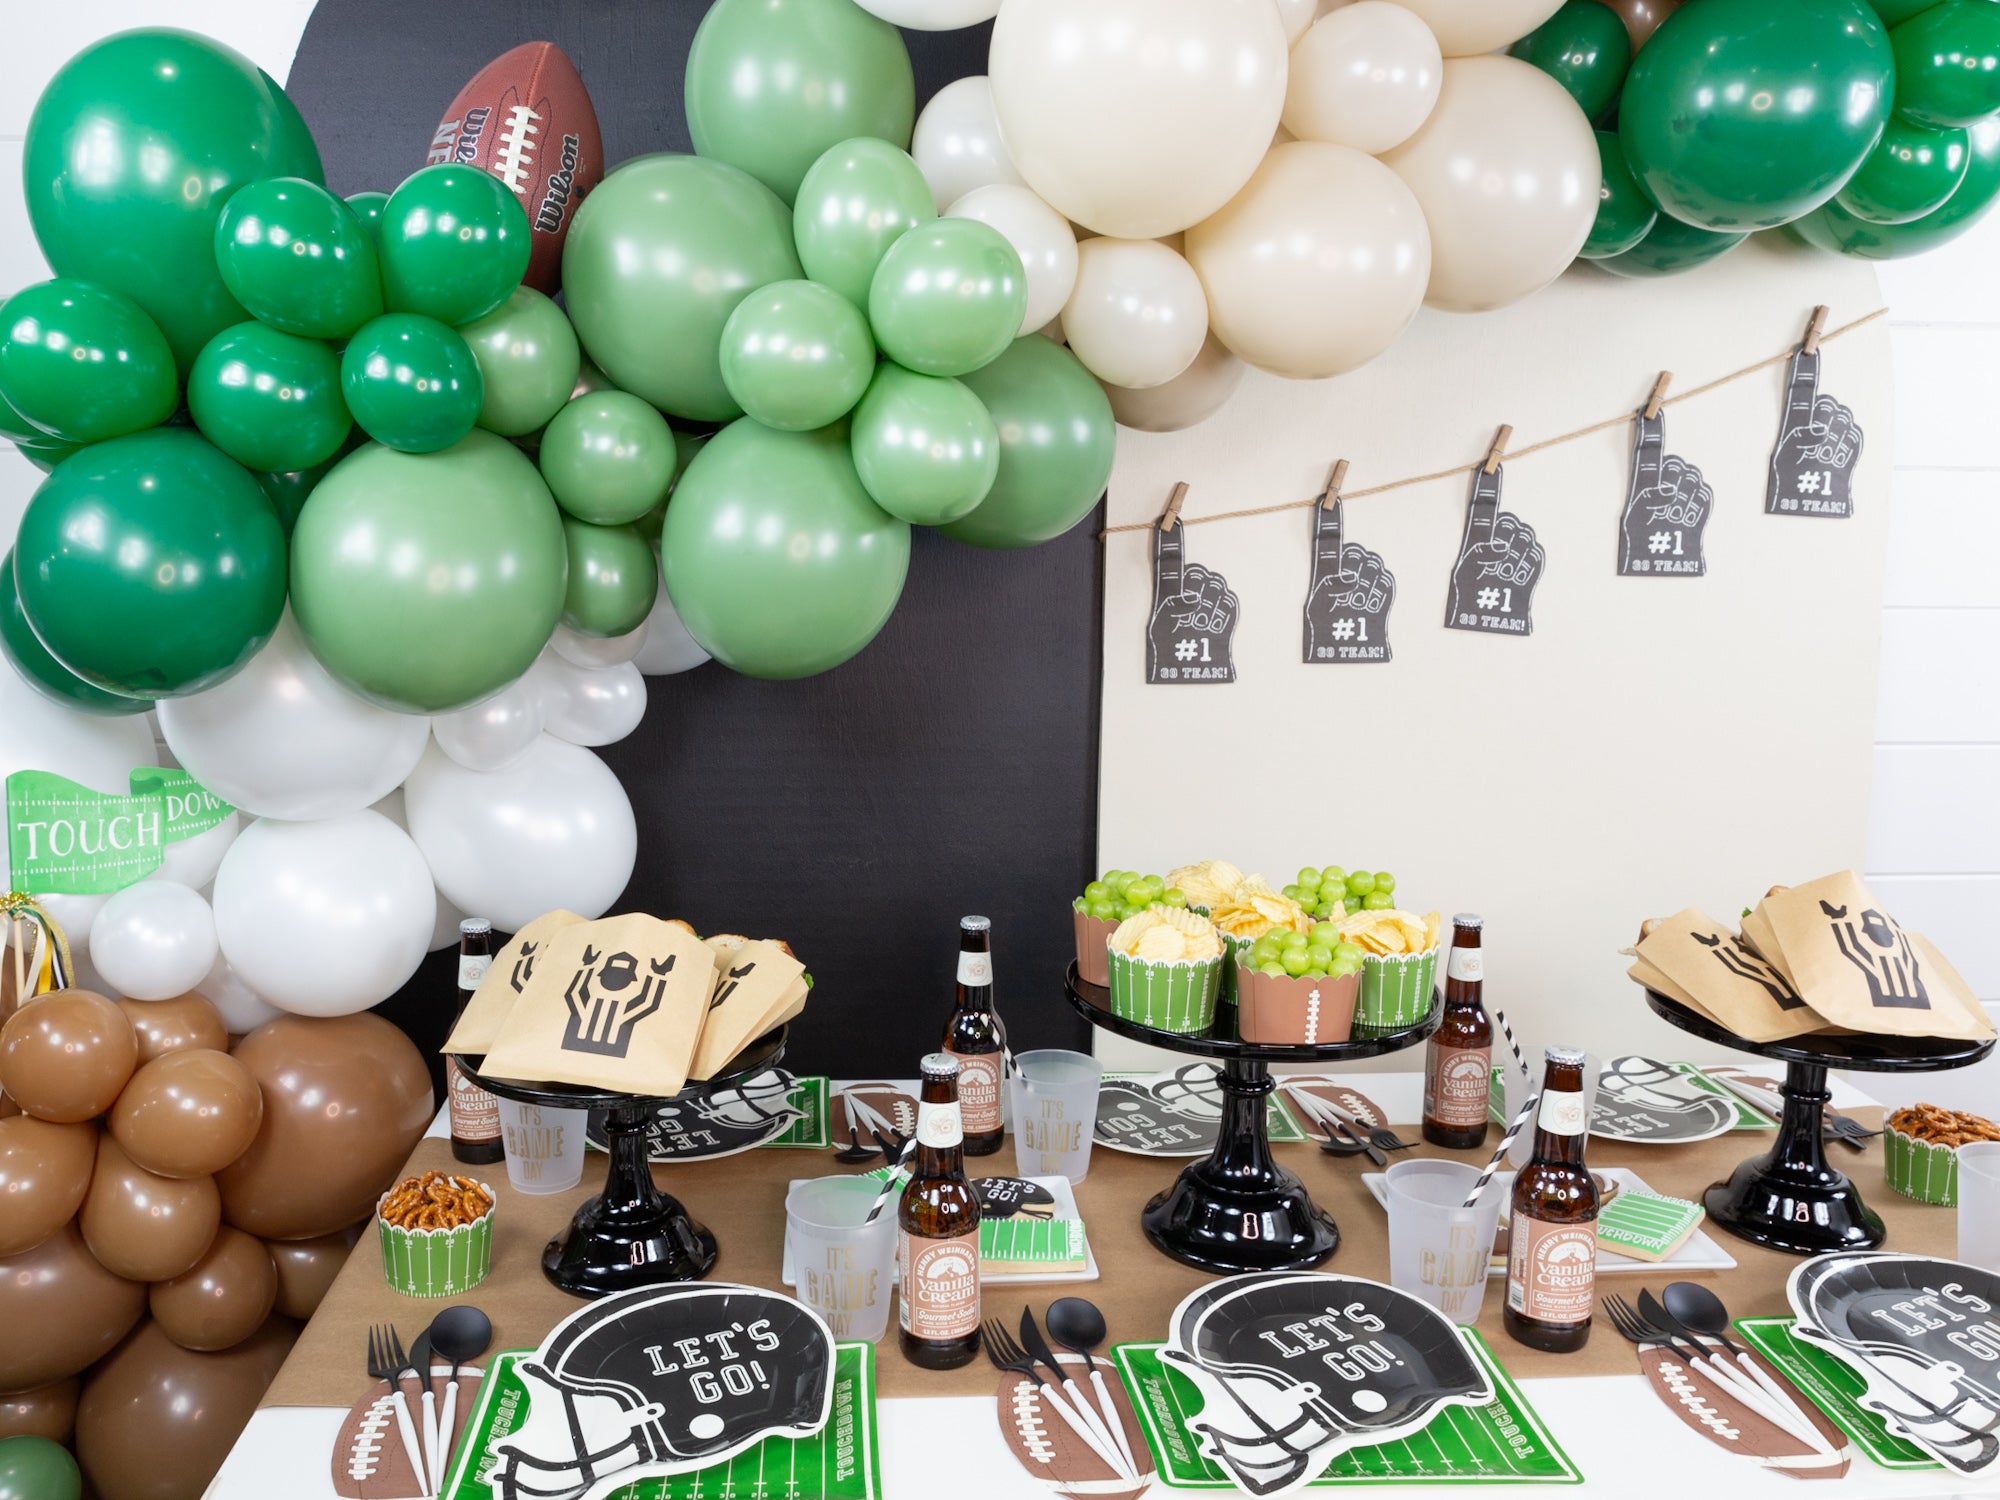 Football Party Decorations to Kick off Football Season - The Party Darling